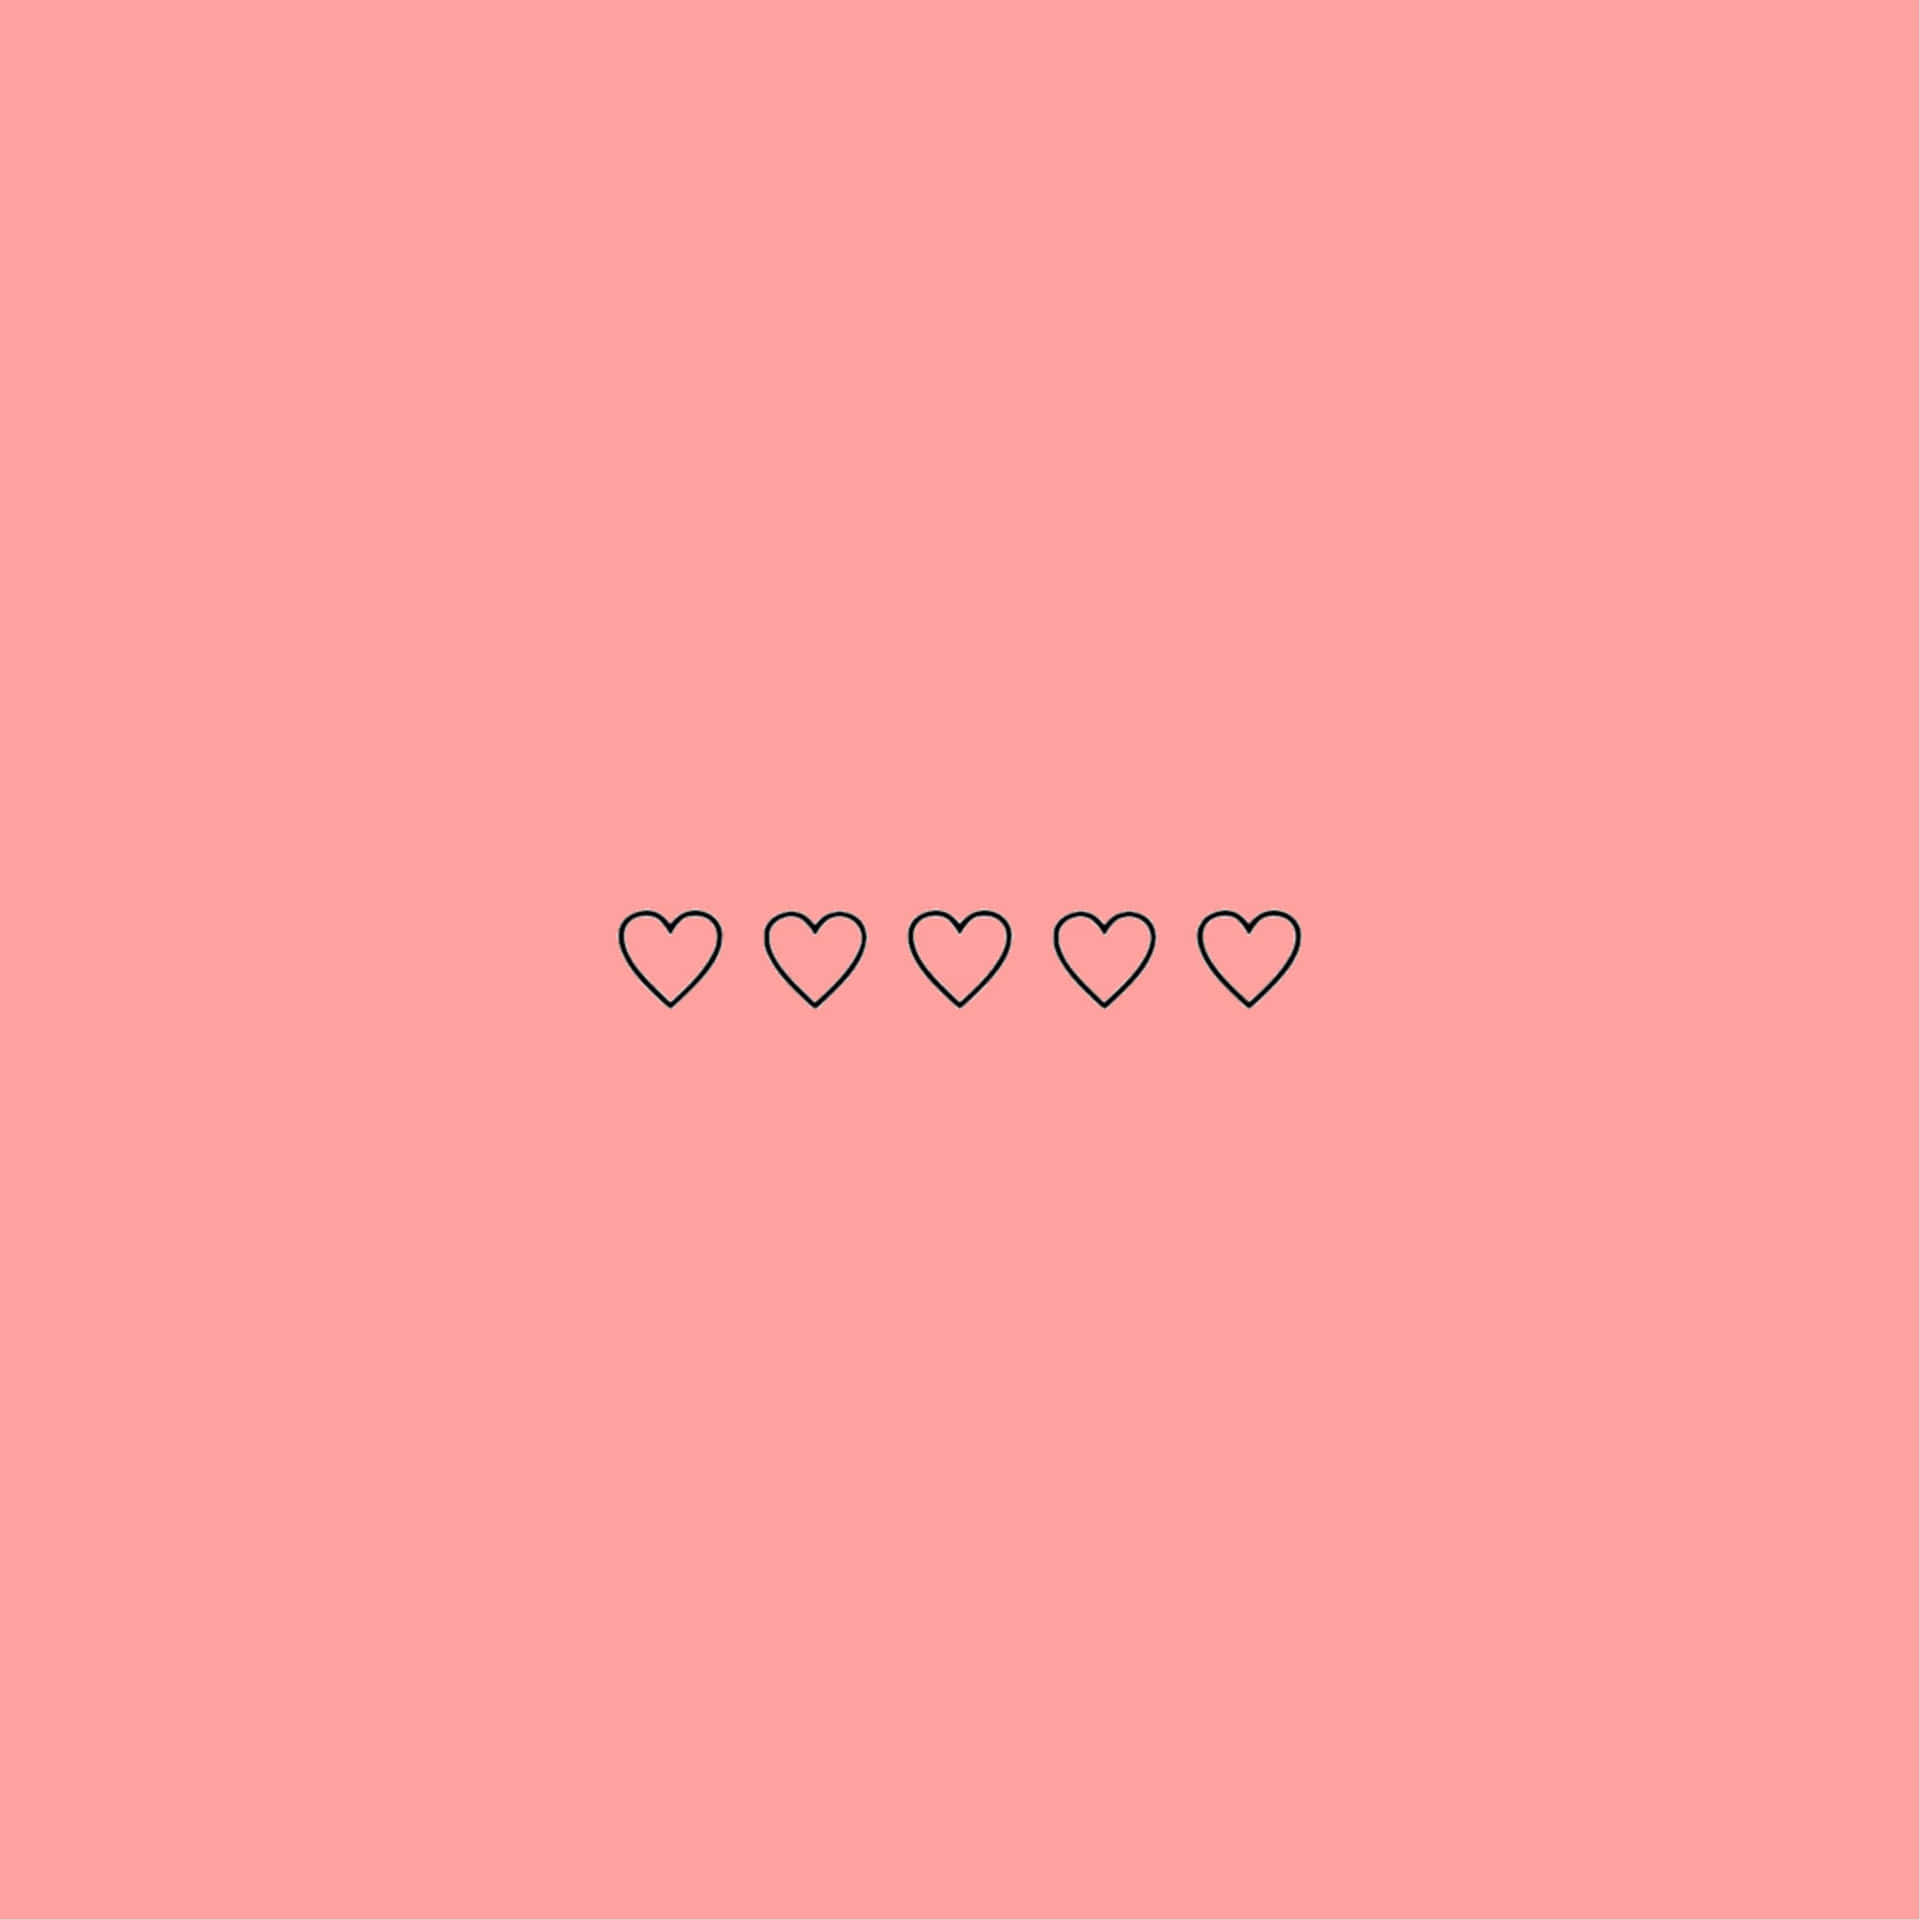 A Pink Background With Hearts On It Wallpaper